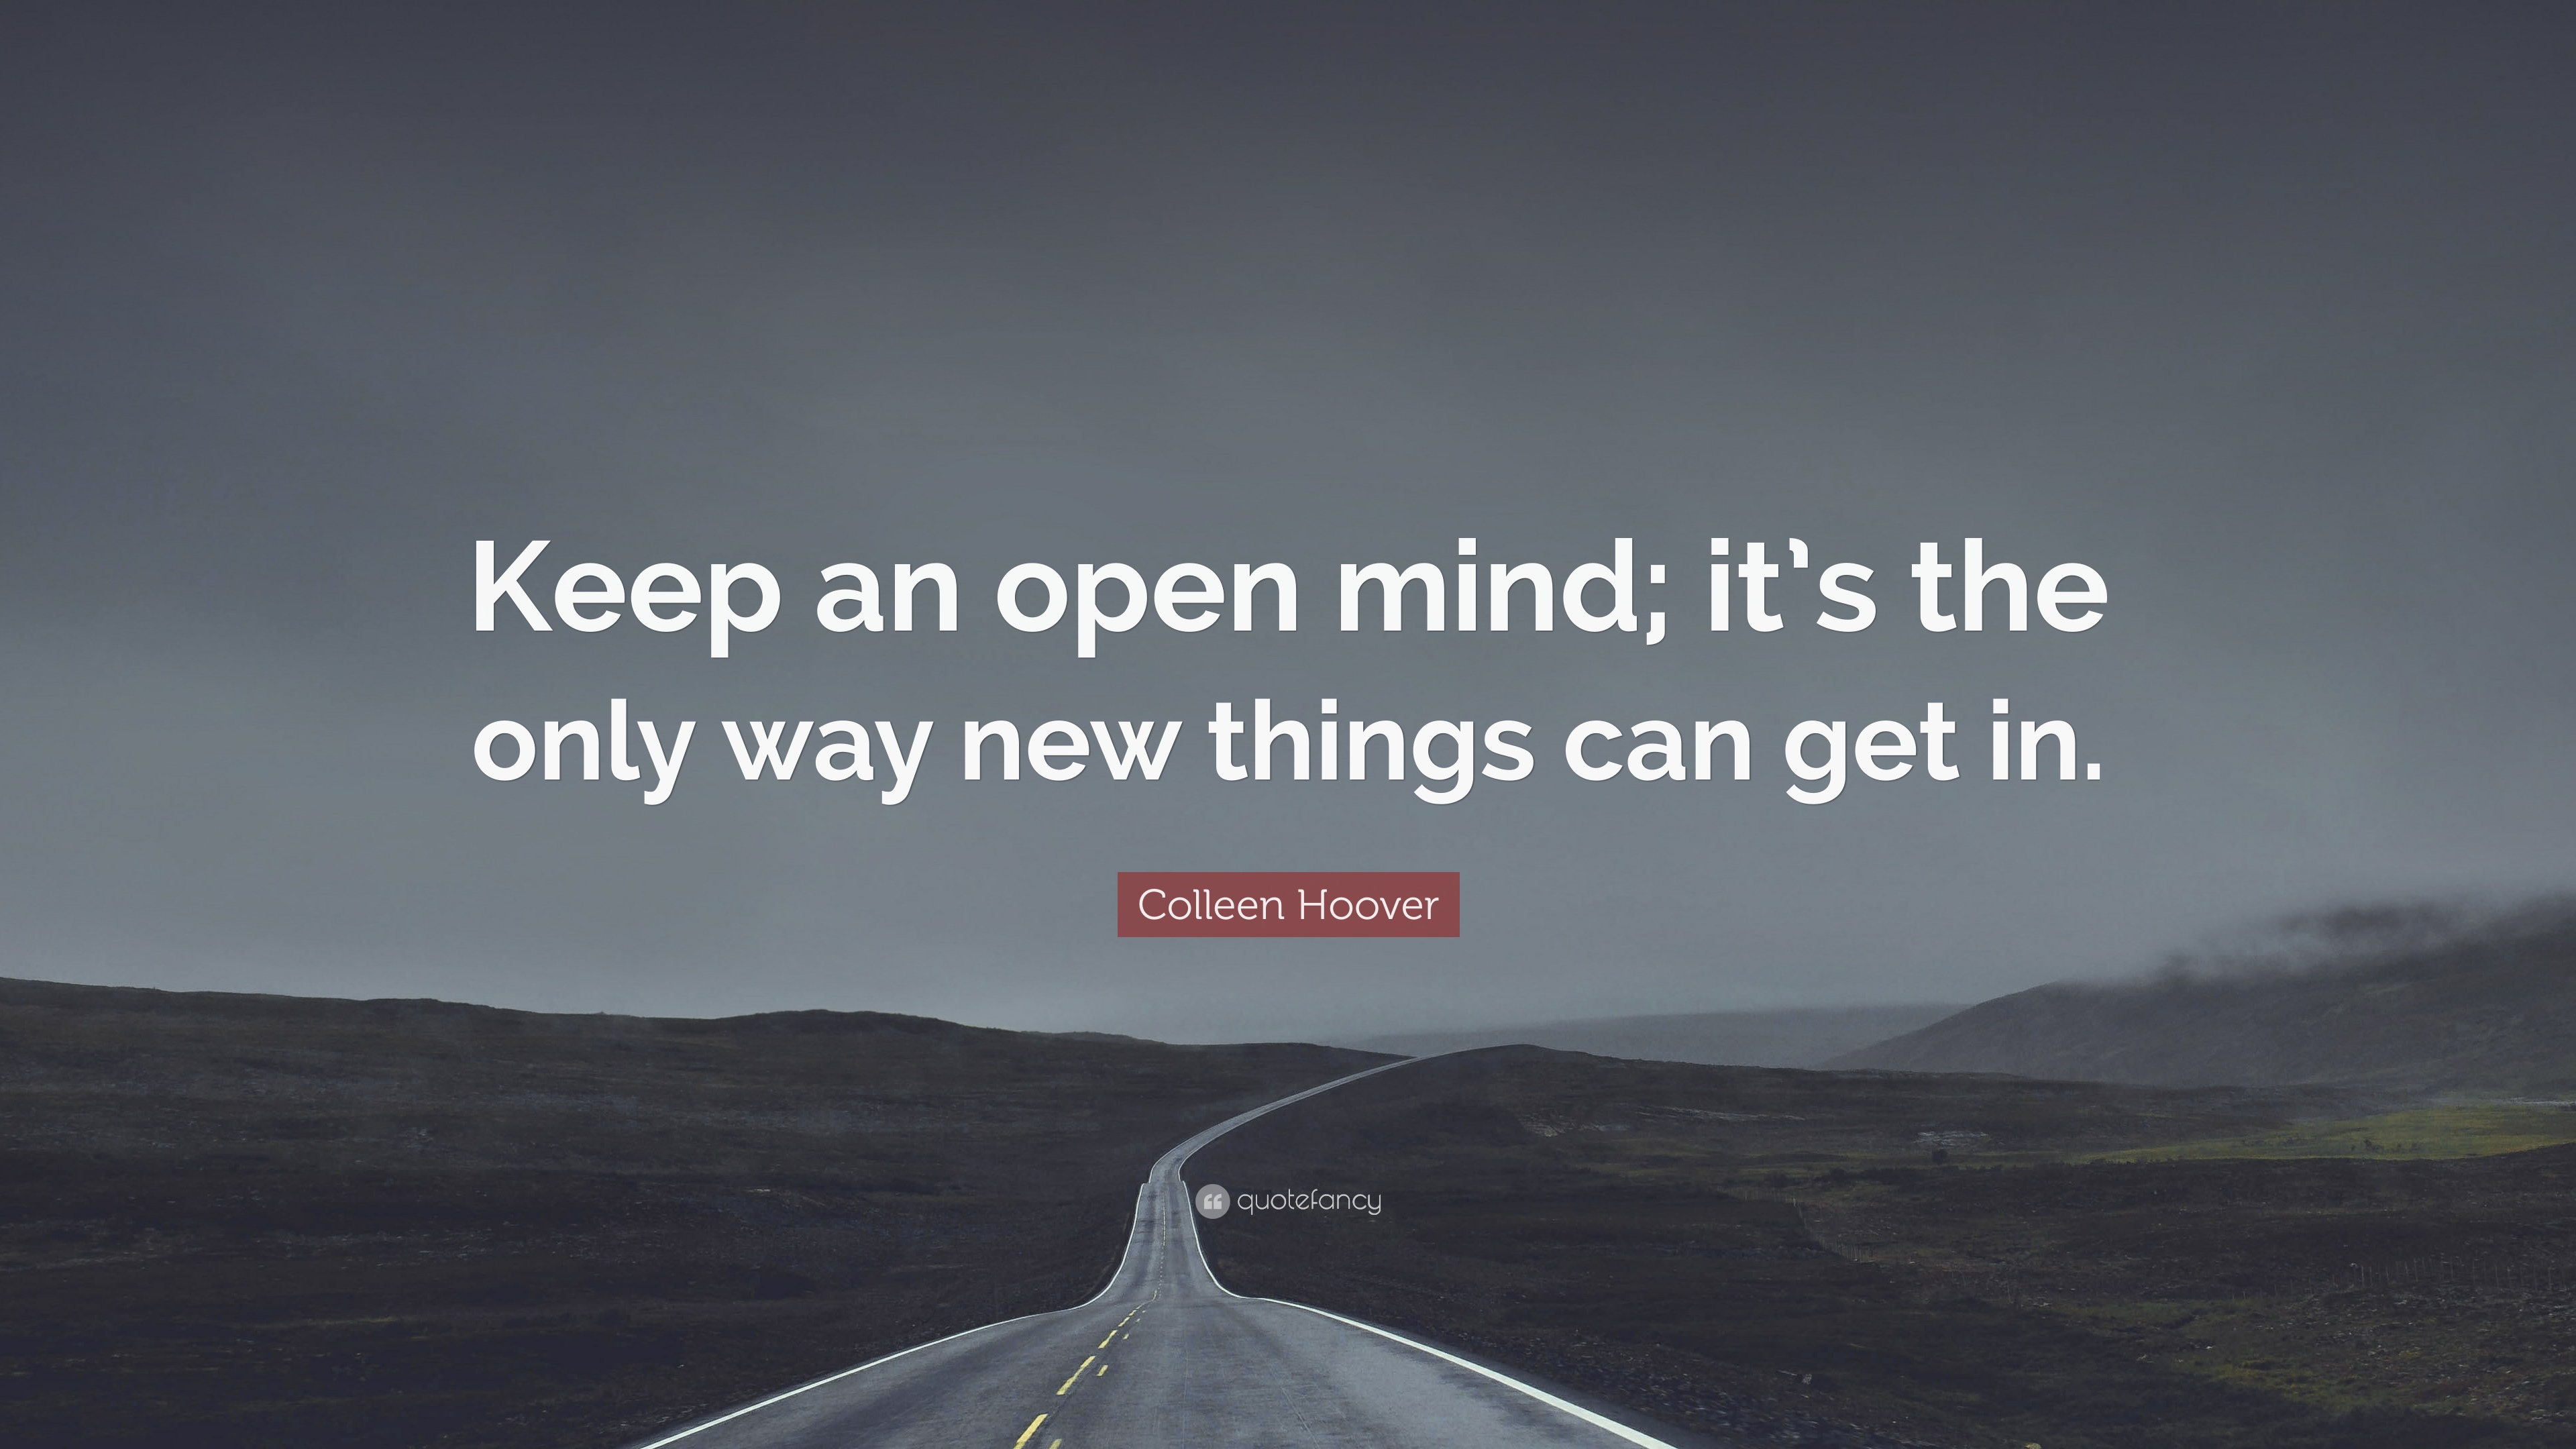 Colleen Hoover Quote: “Keep an open mind; it's the only way new things can get in.”